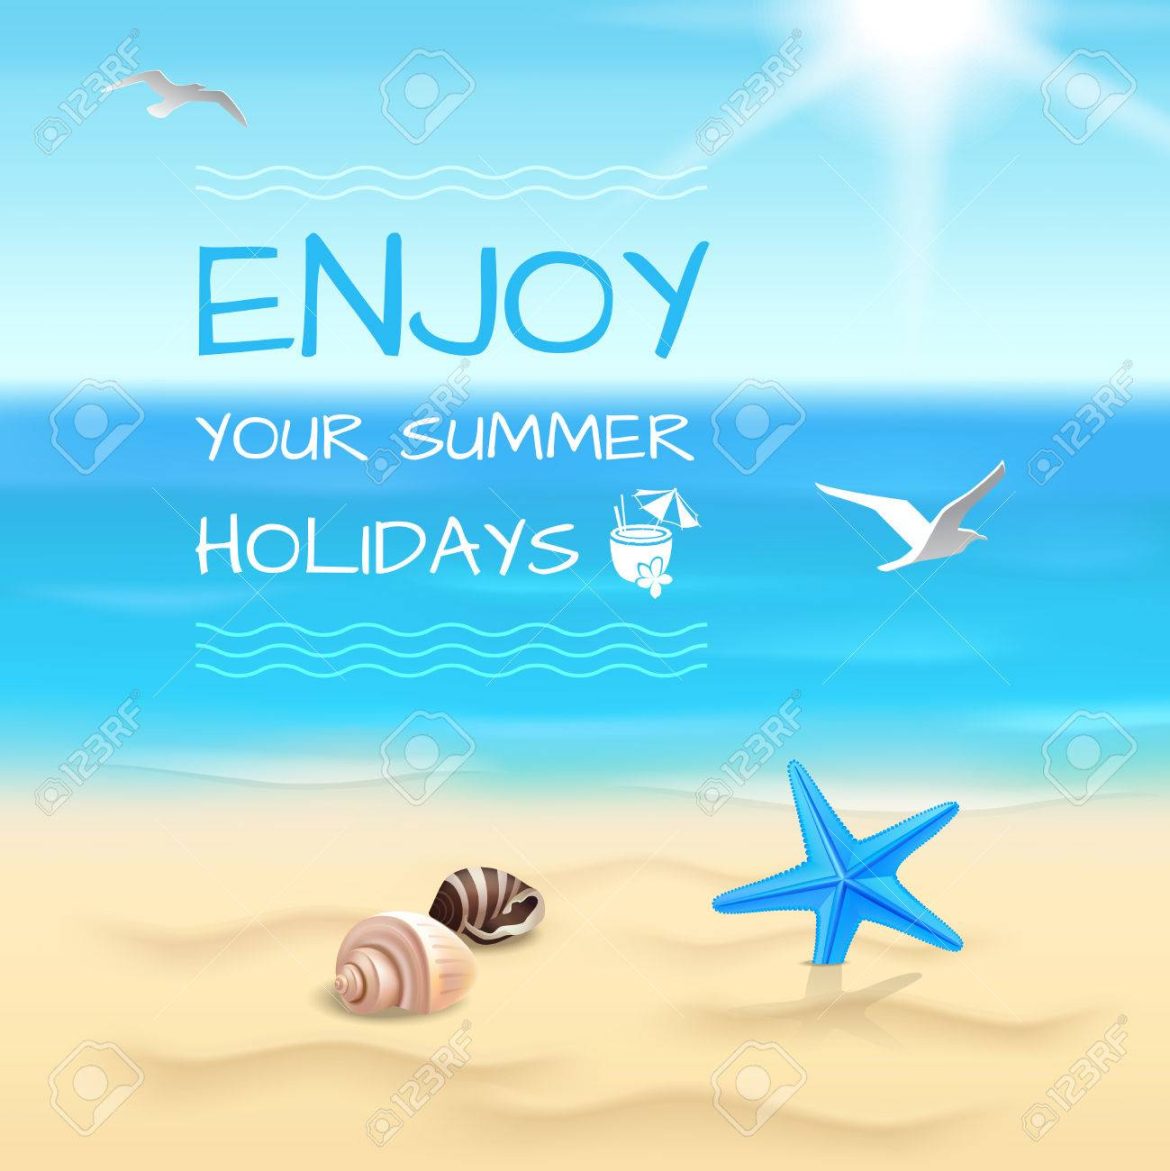 Enjoy your Holiday in the sea side